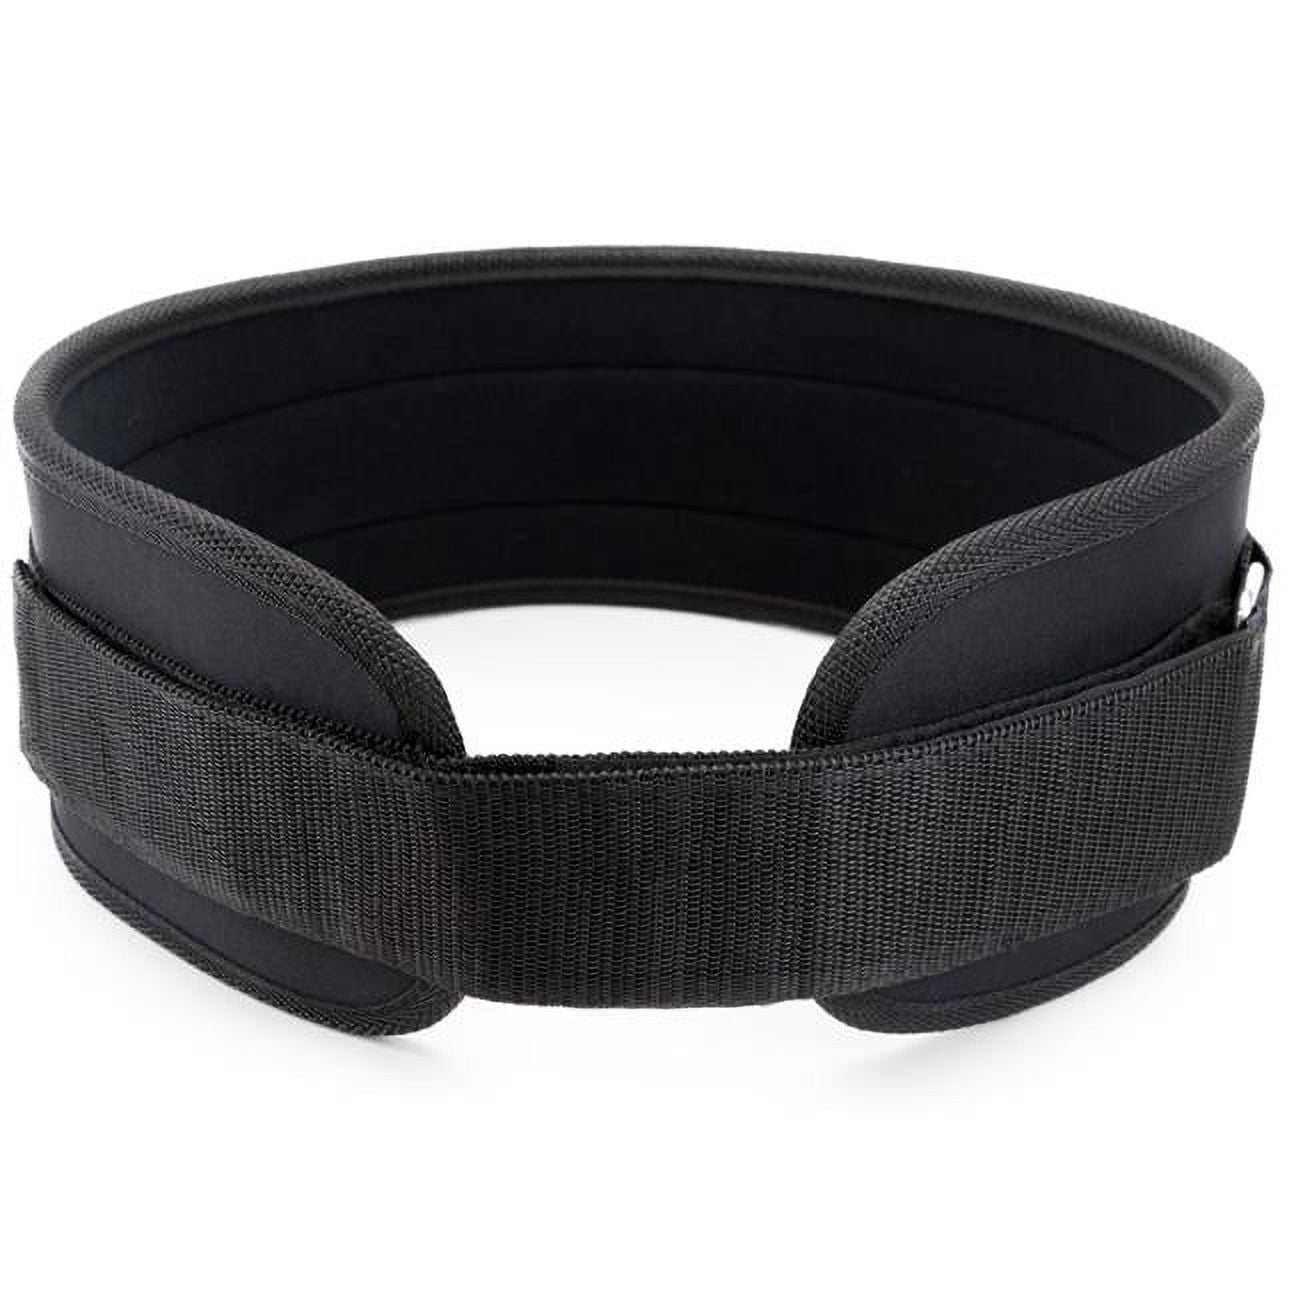 Picture of Brybelly SWGT-901 Weight Lifting Belt - Medium